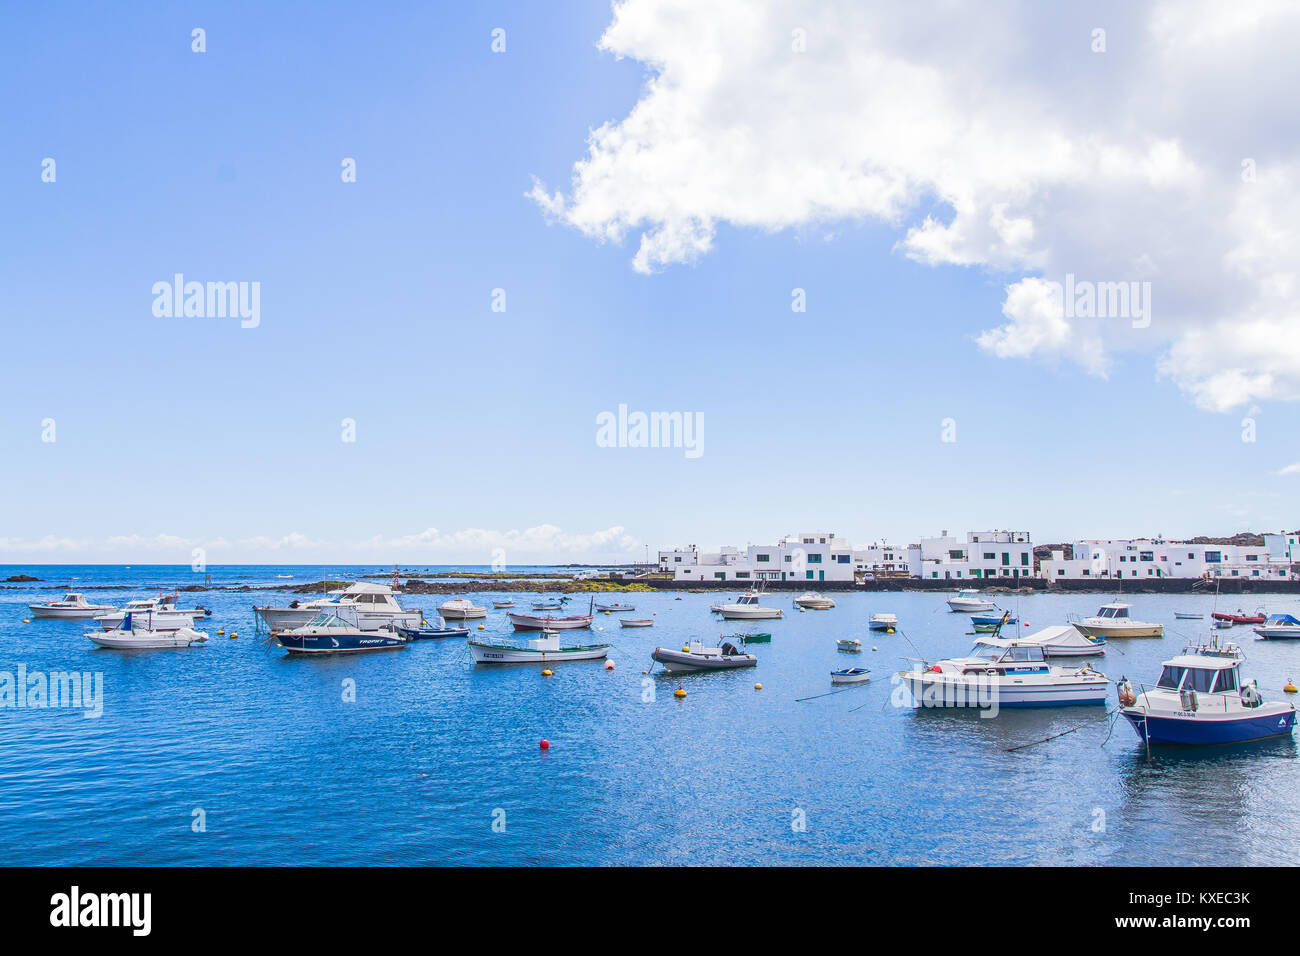 Shot from my trip on the road across Lanzarote, Canary Islands Stock Photo